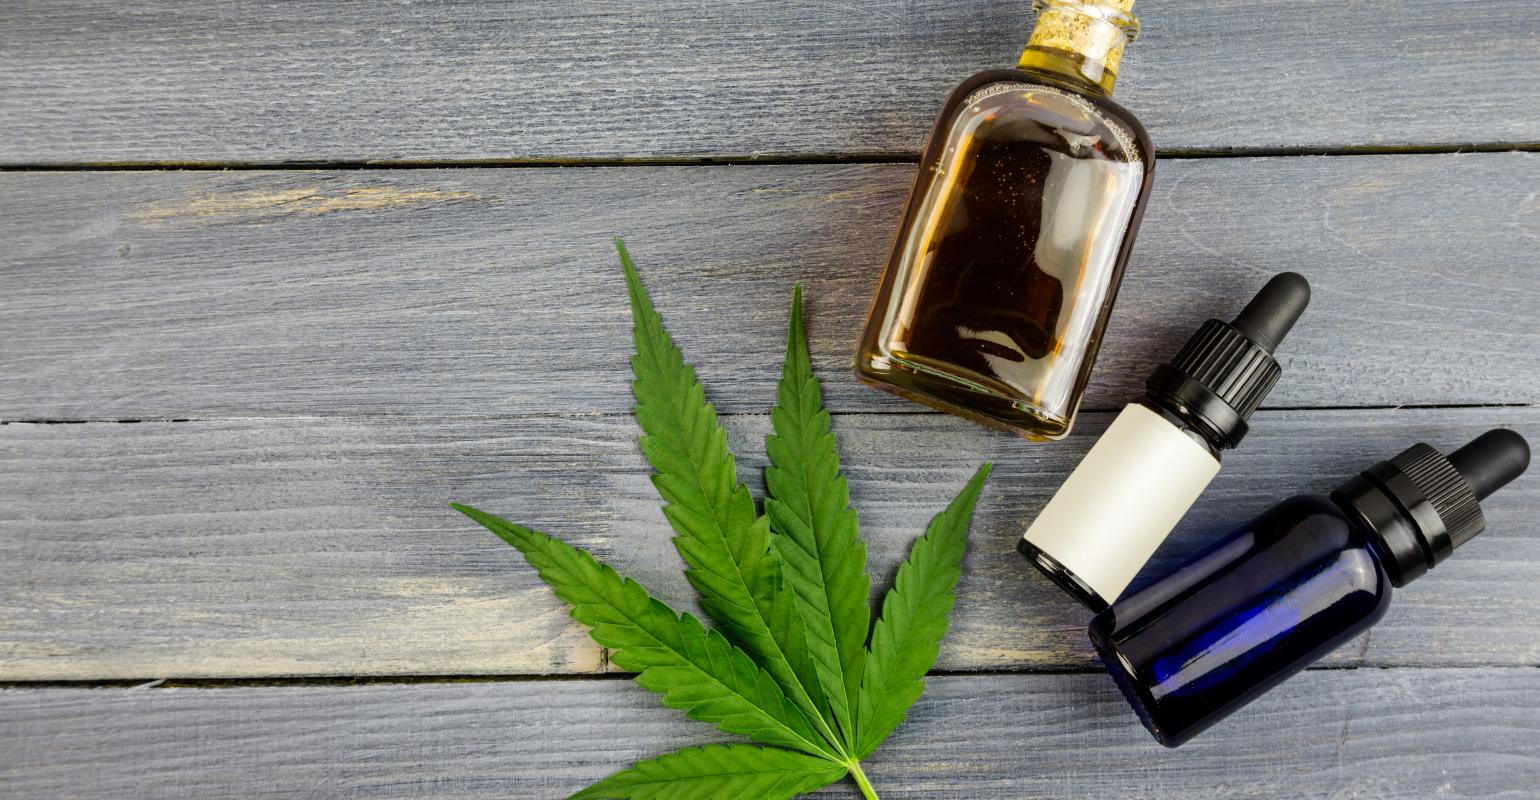 Can you diffuse cbd oil - 3 things you need to know!